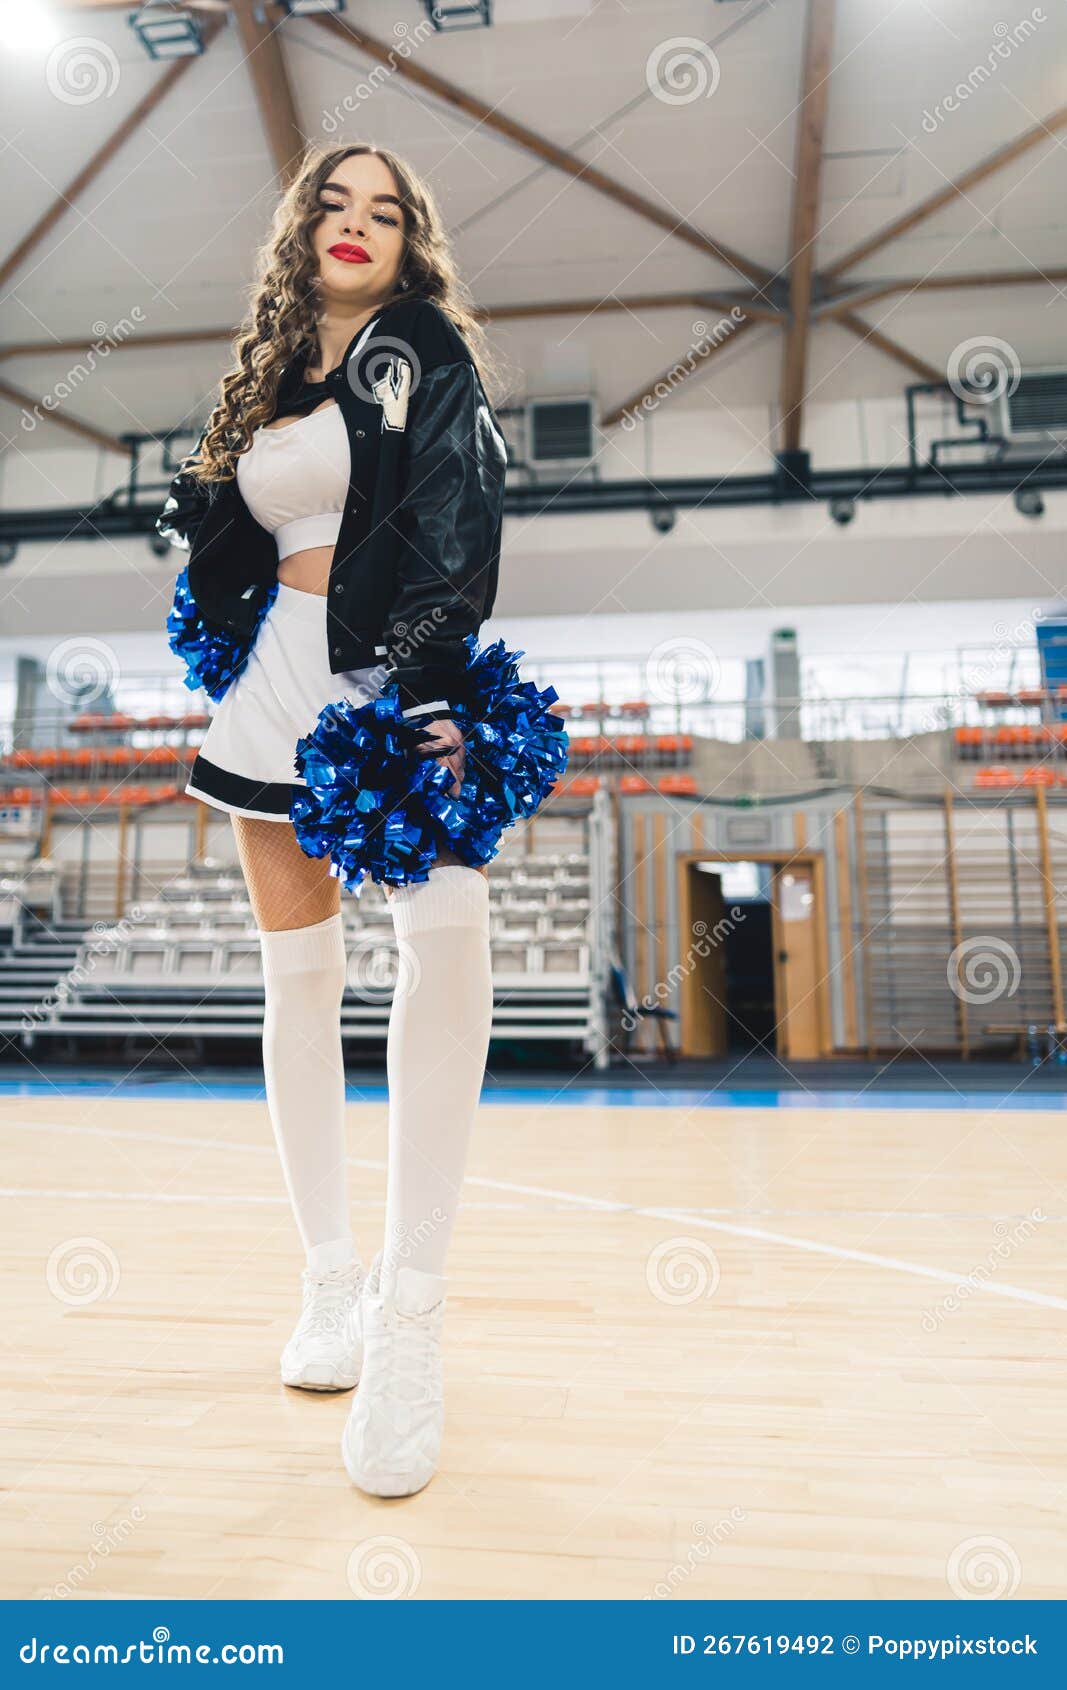 Cheerleader girl pose standing with pom-pom Stock Photo by ©studiomediaceh  55068527